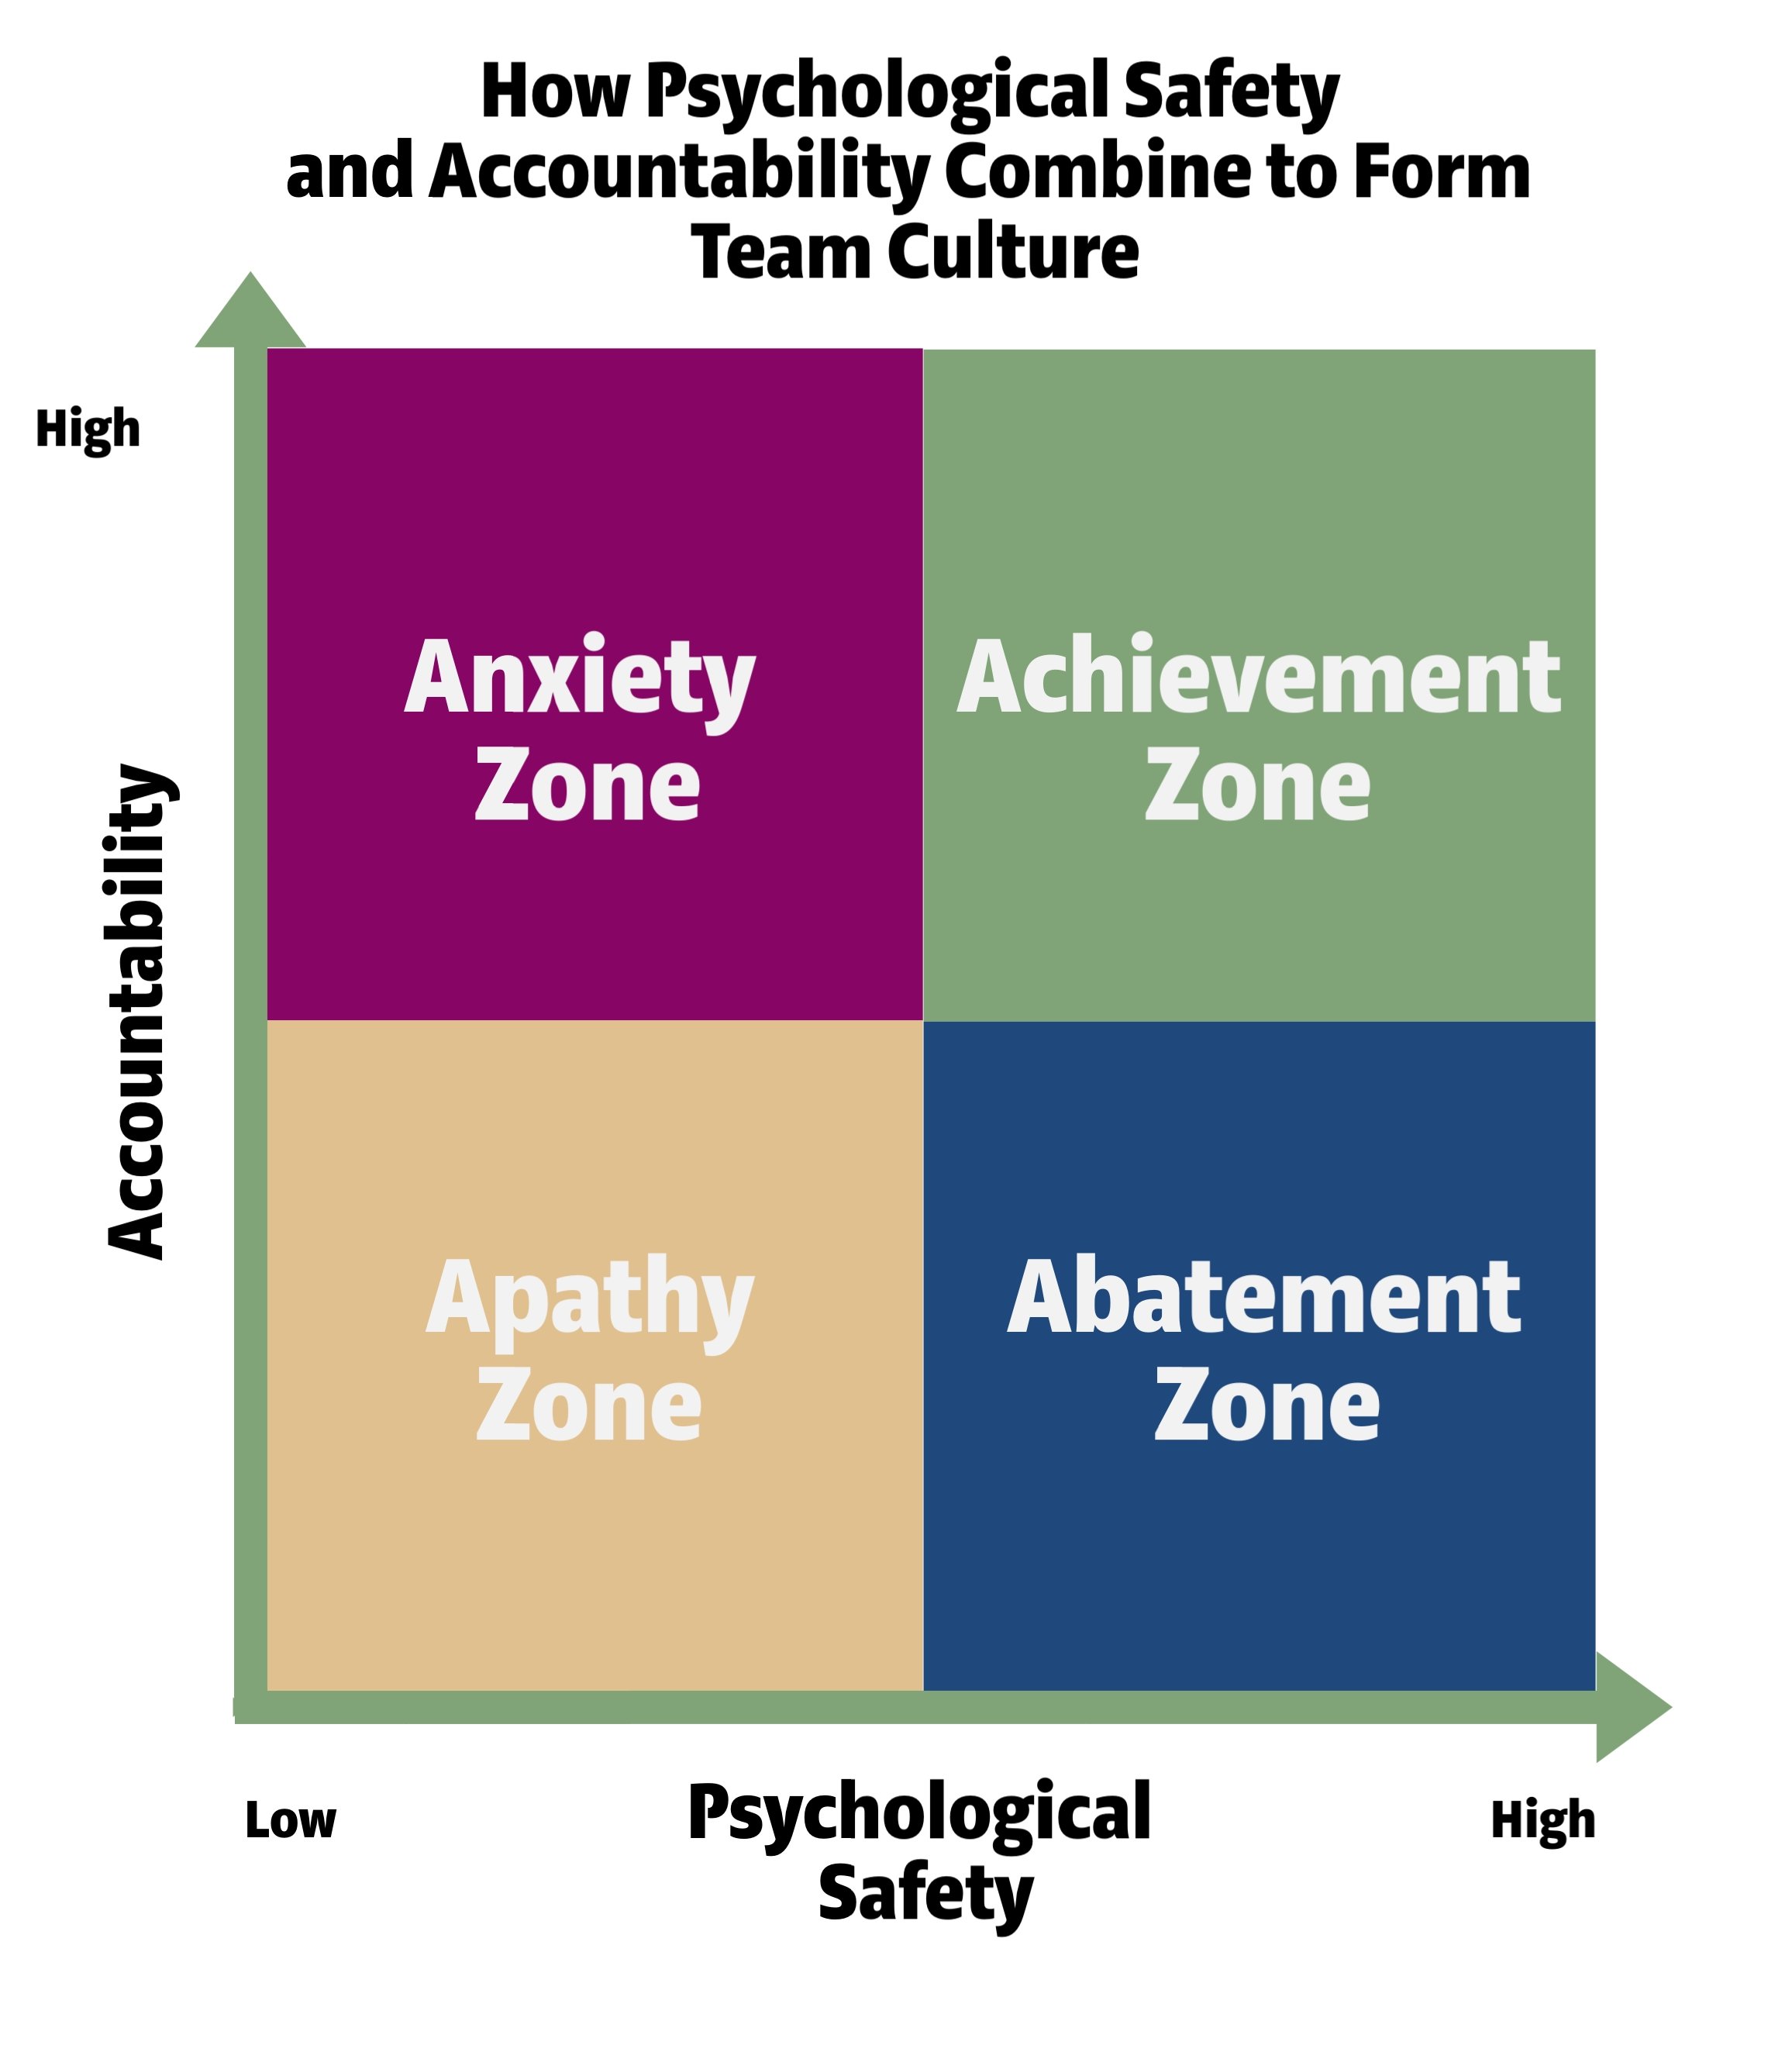 How to Lead Yourself into the Achievement Team Zone